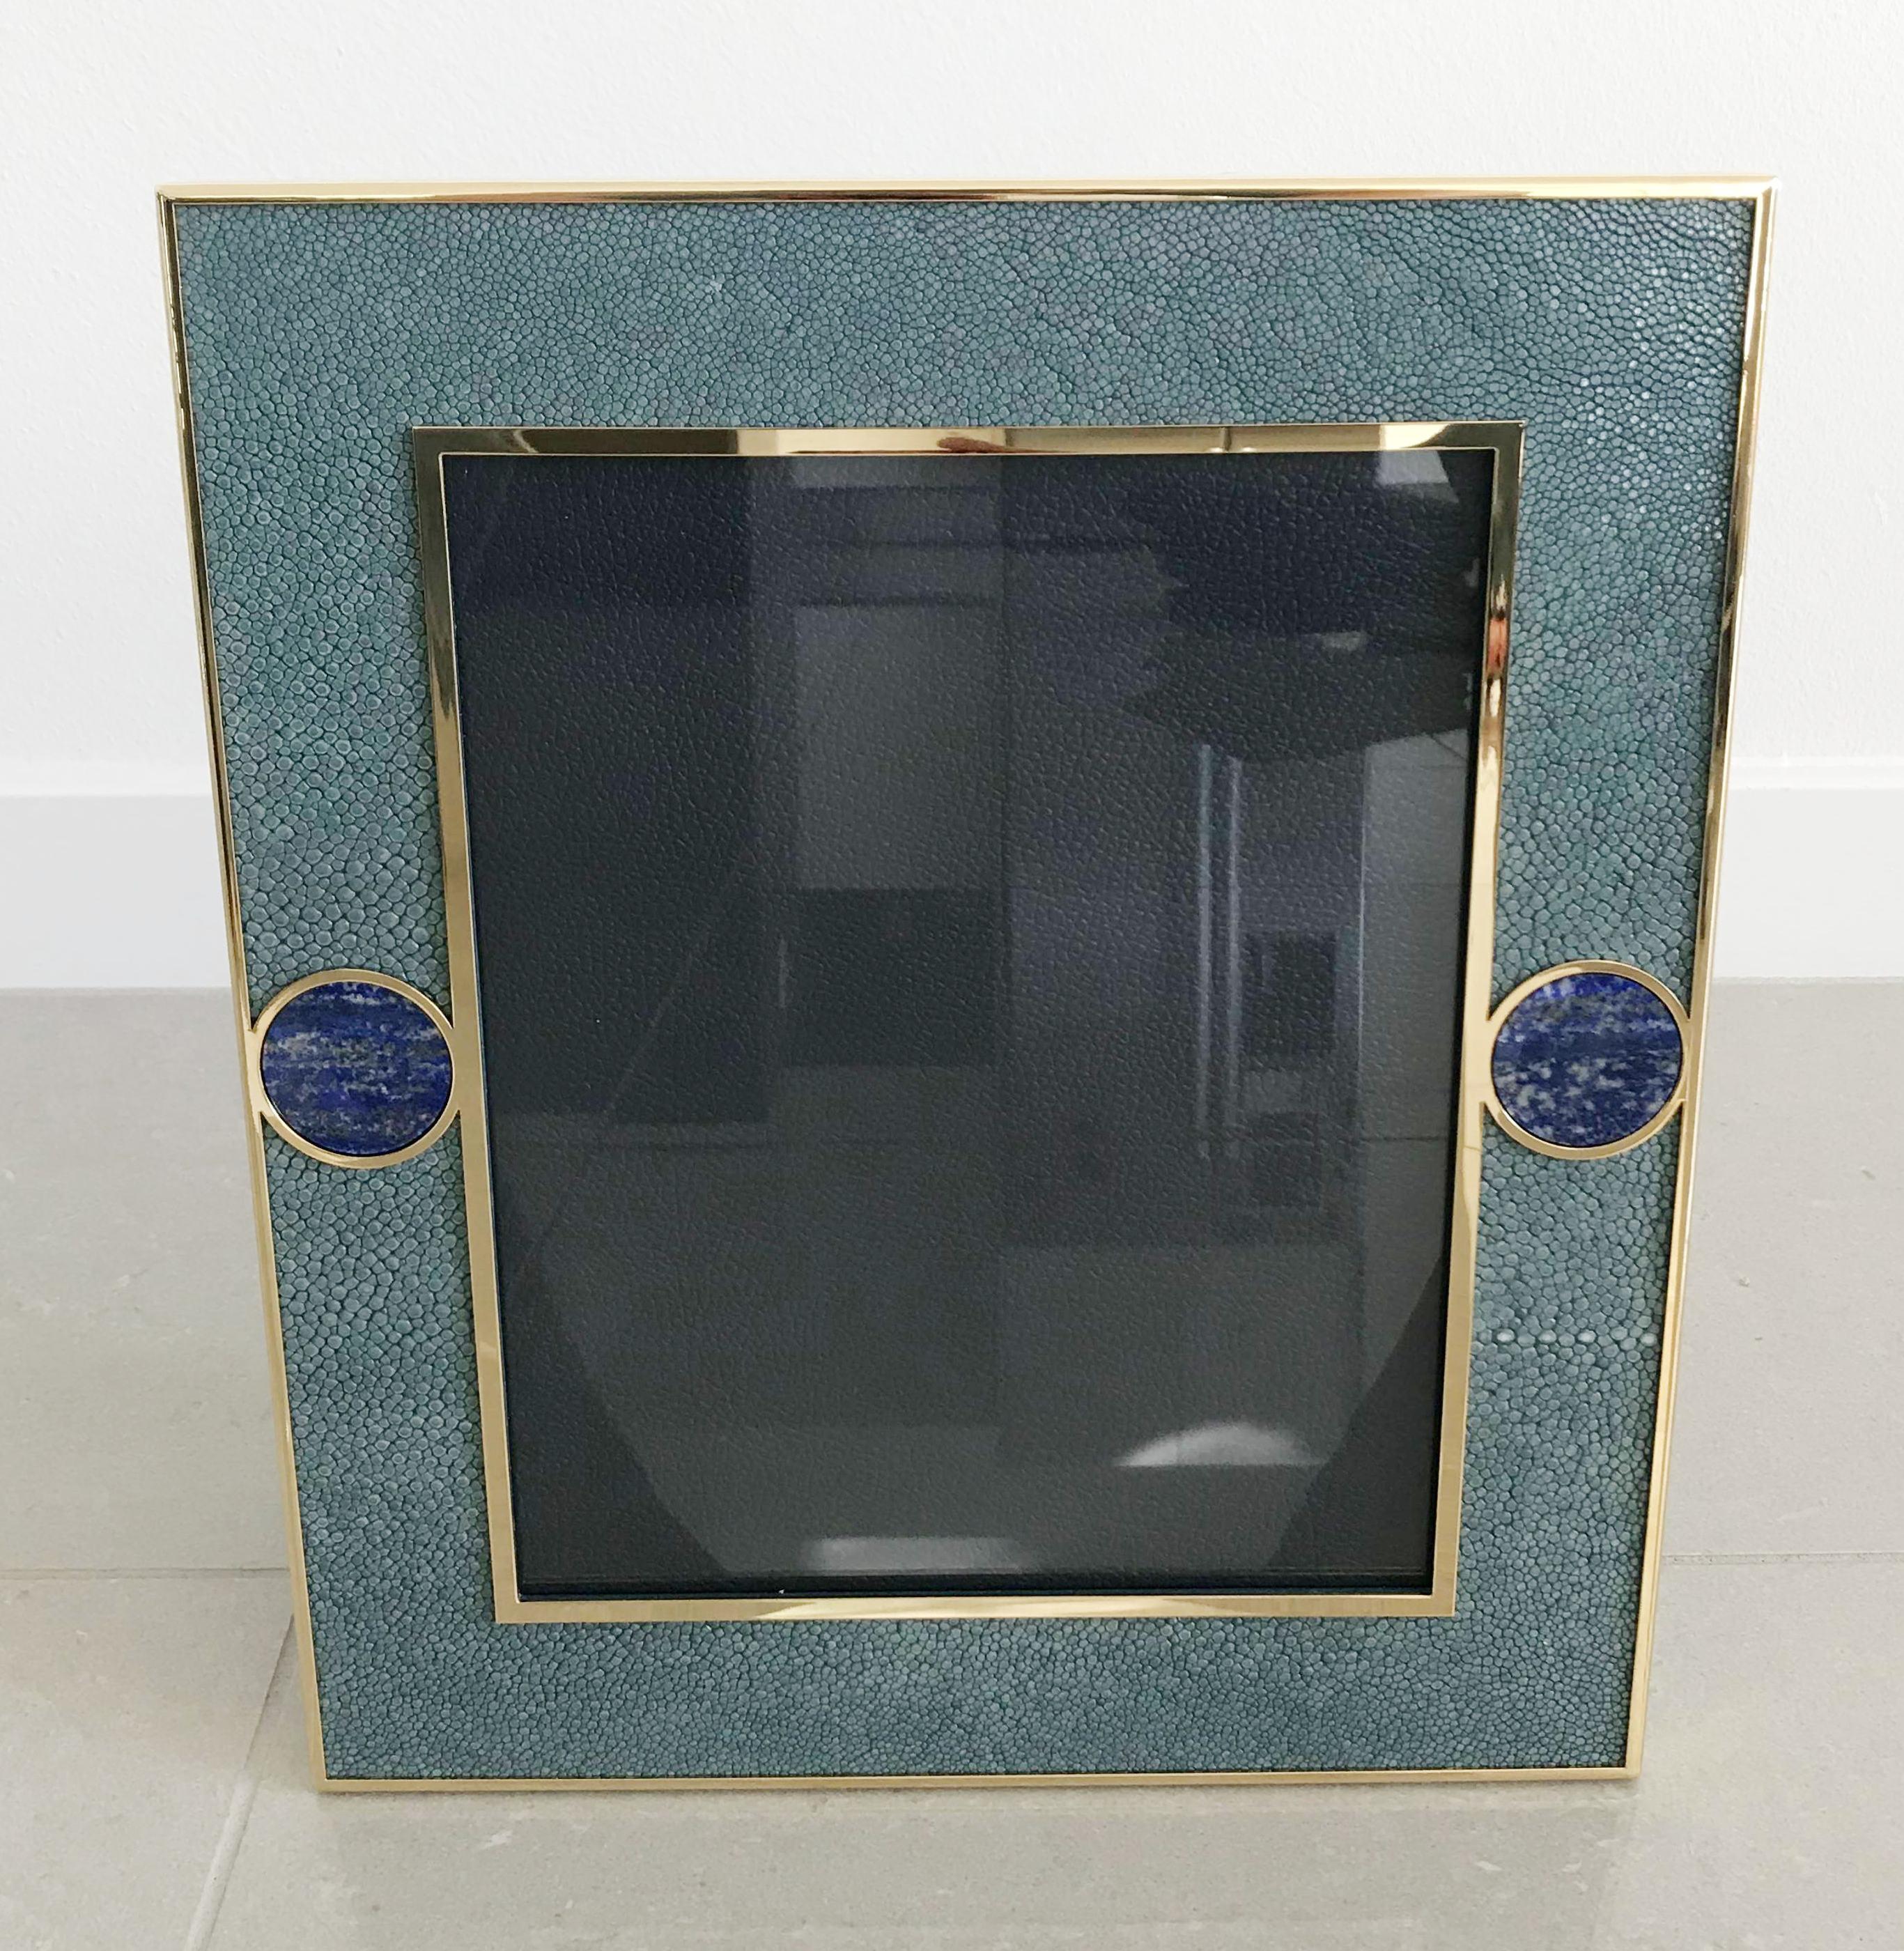 Blue shagreen leather with Lapis Lazuli inserts and gold-plated picture frame by Fabio Ltd
Measures: Height 13.5 inches / width 11.5 inches / depth 1 inch
Photo size: 8 inches by 10 inches
LAST 1 in stock in Los Angeles
Order Reference #: FABIOLTD